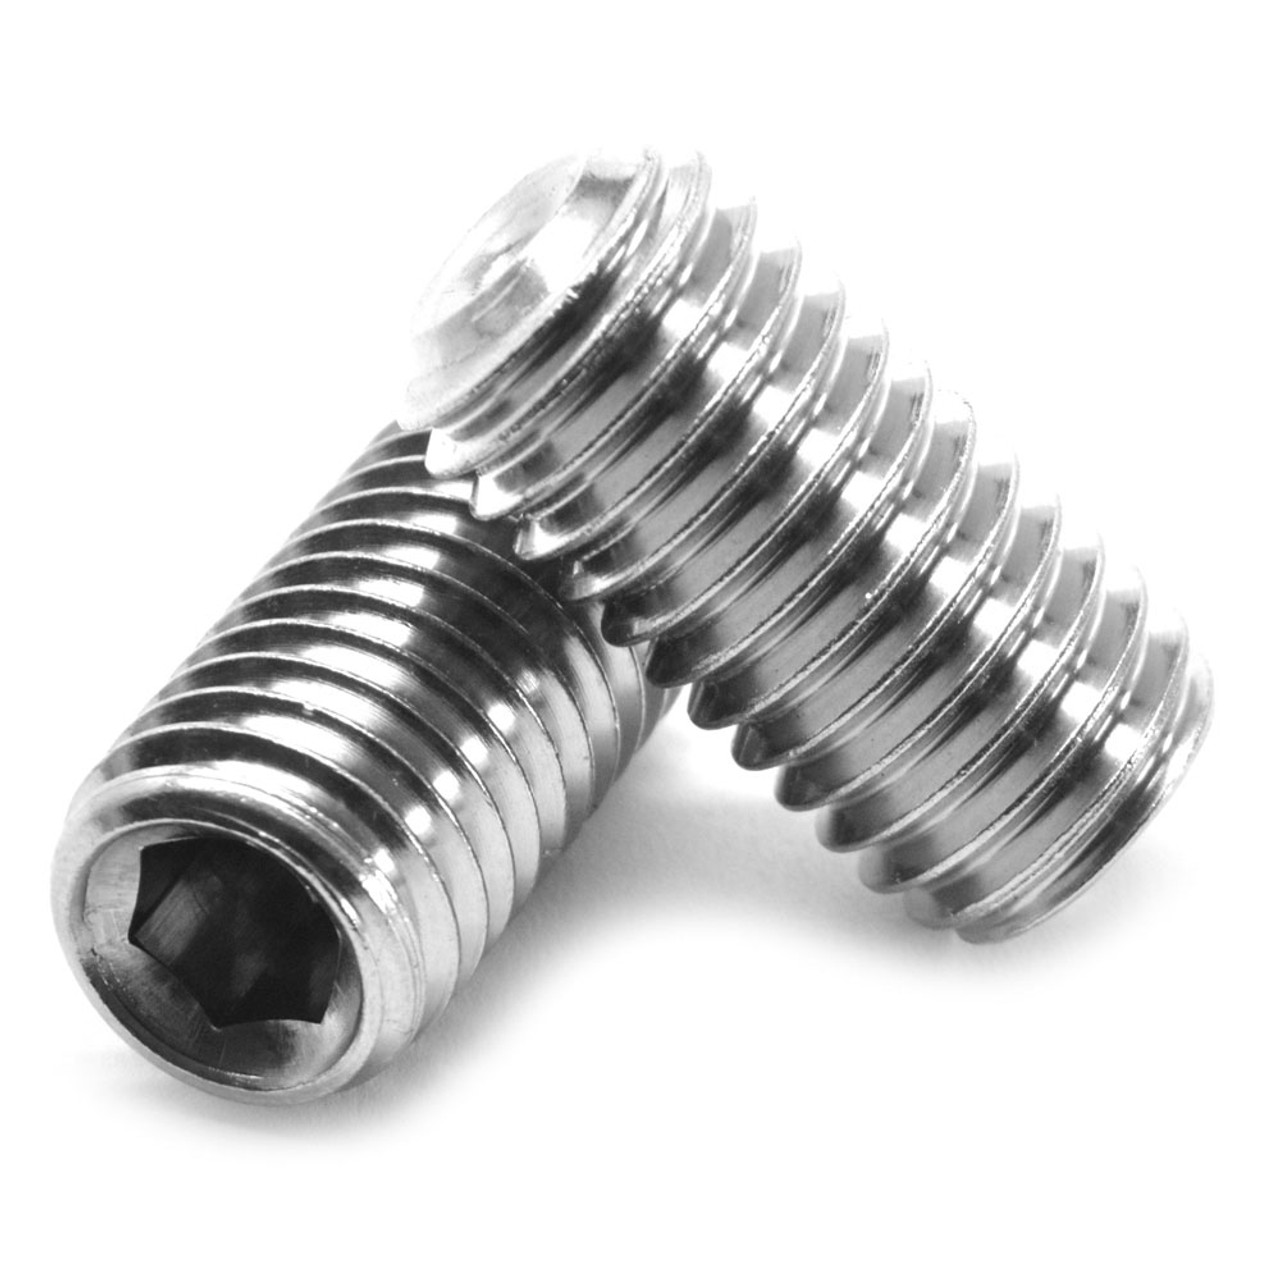 #5-40 x 3/8" Coarse Thread Socket Set Screw Cup Point Stainless Steel 18-8